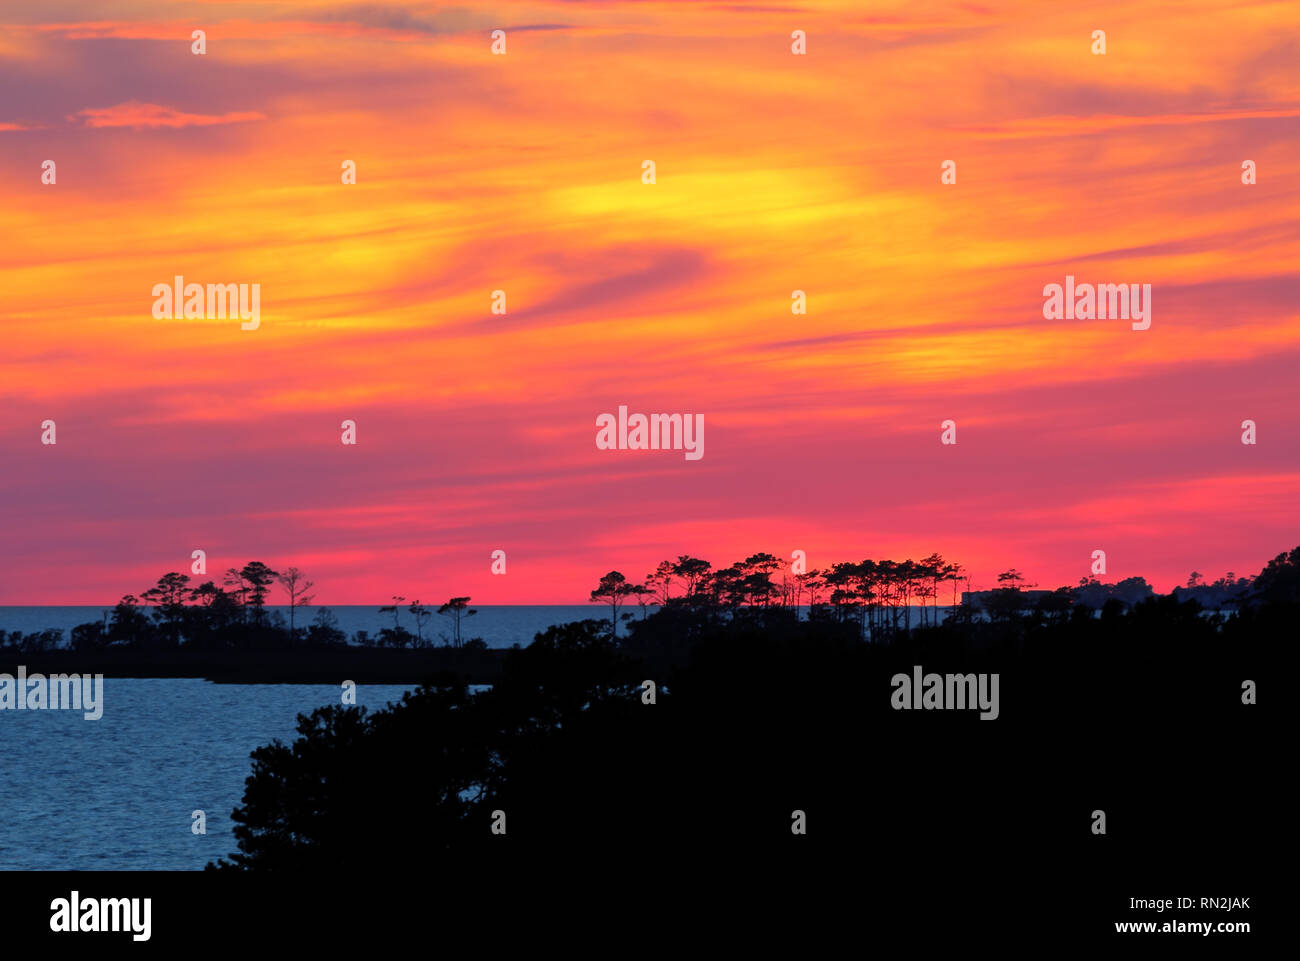 Dramatic, coloful sunset over Albemarle Sound as viewed from Jockeys Ridge State Park in the town of Nags Head on the Outer Banks of North Carolina Stock Photo